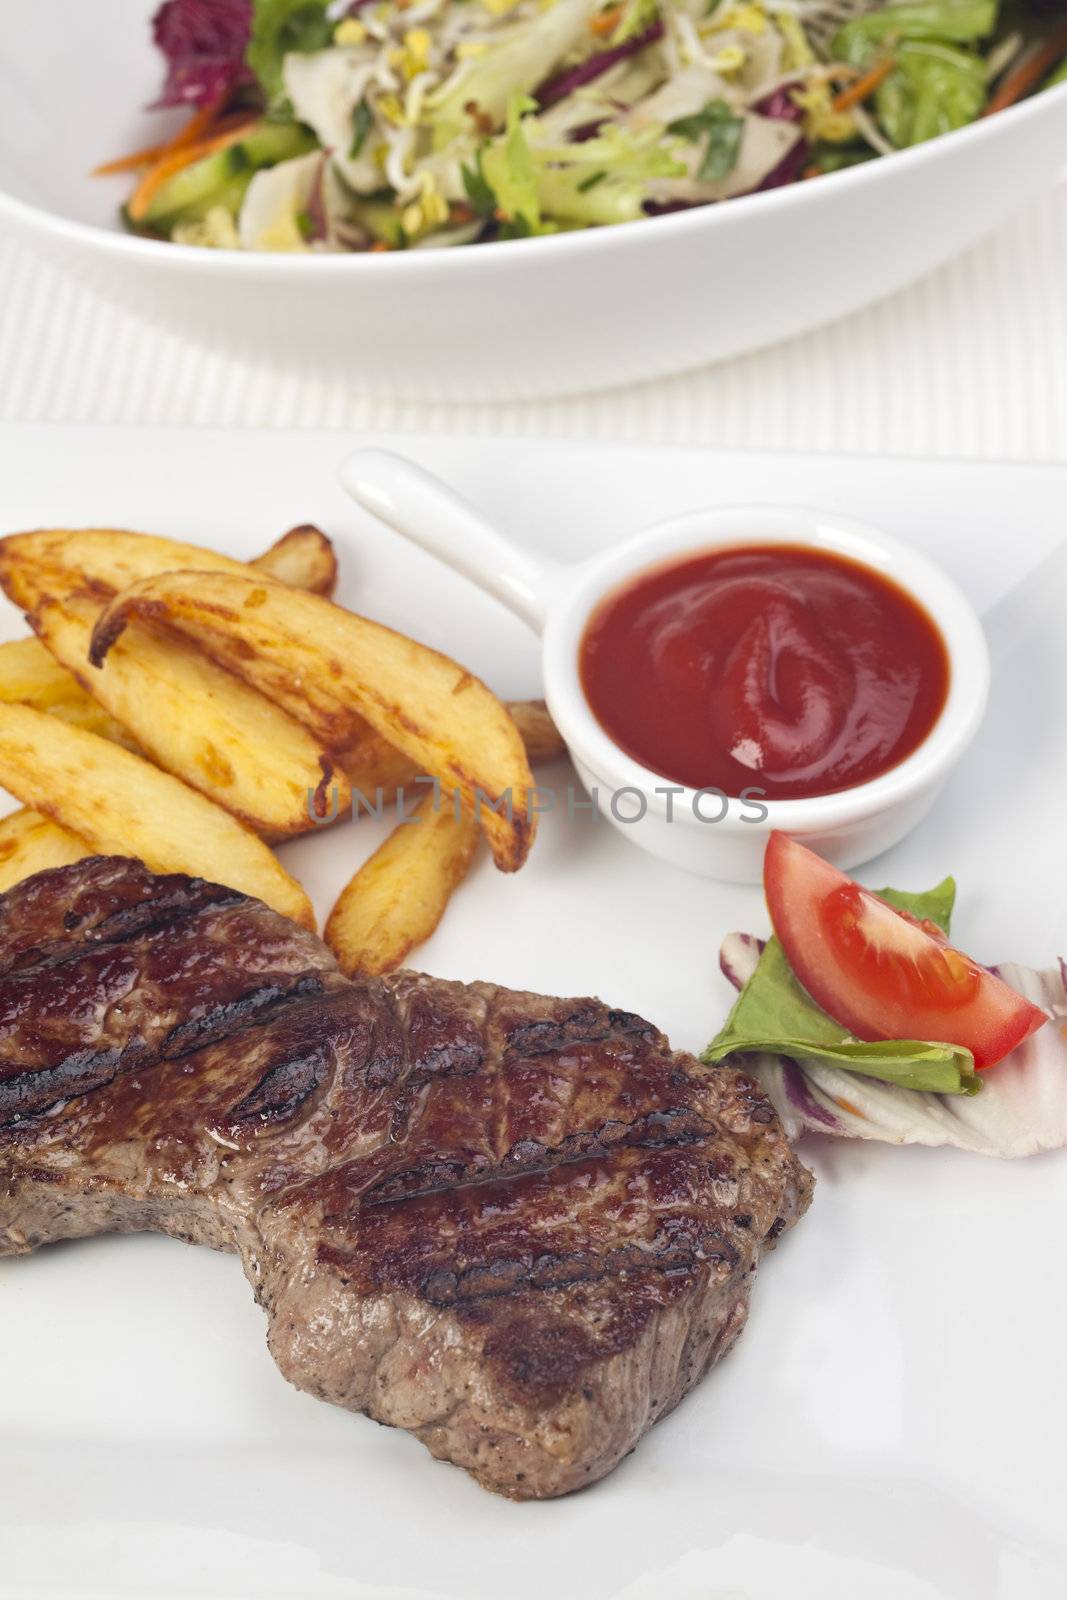 steak and french fries on a plate by bernjuer